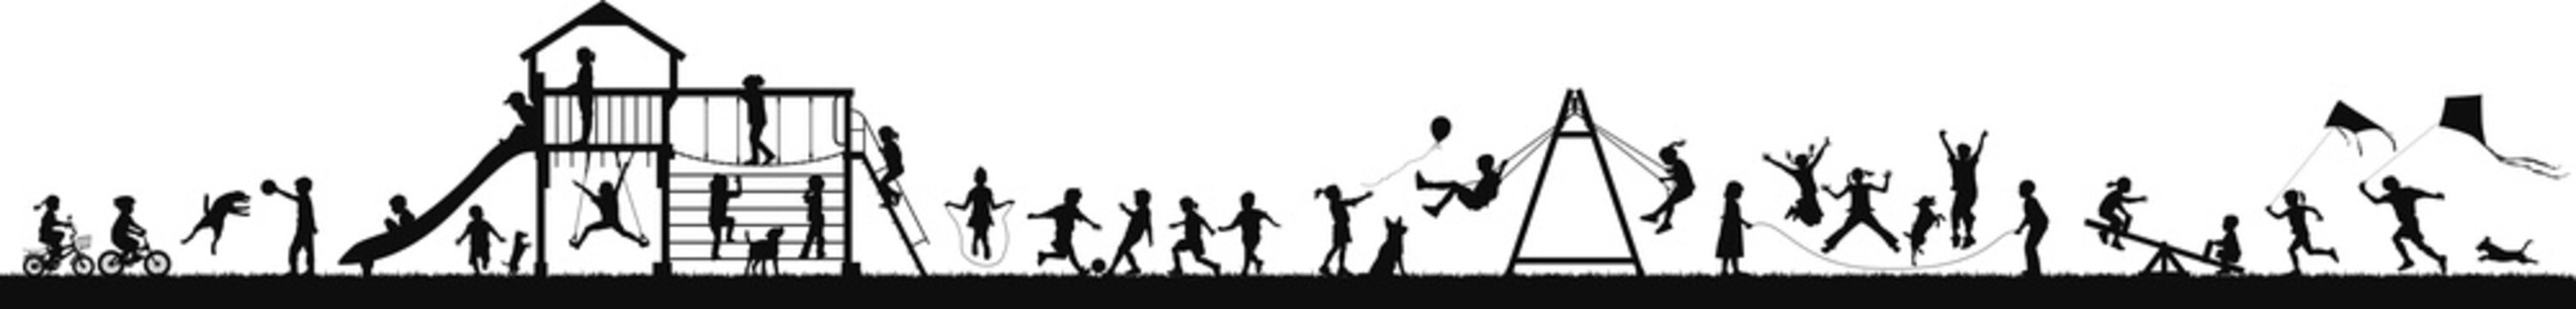 Children girl and boy playing walking and jumping in the park vector silhouette collection